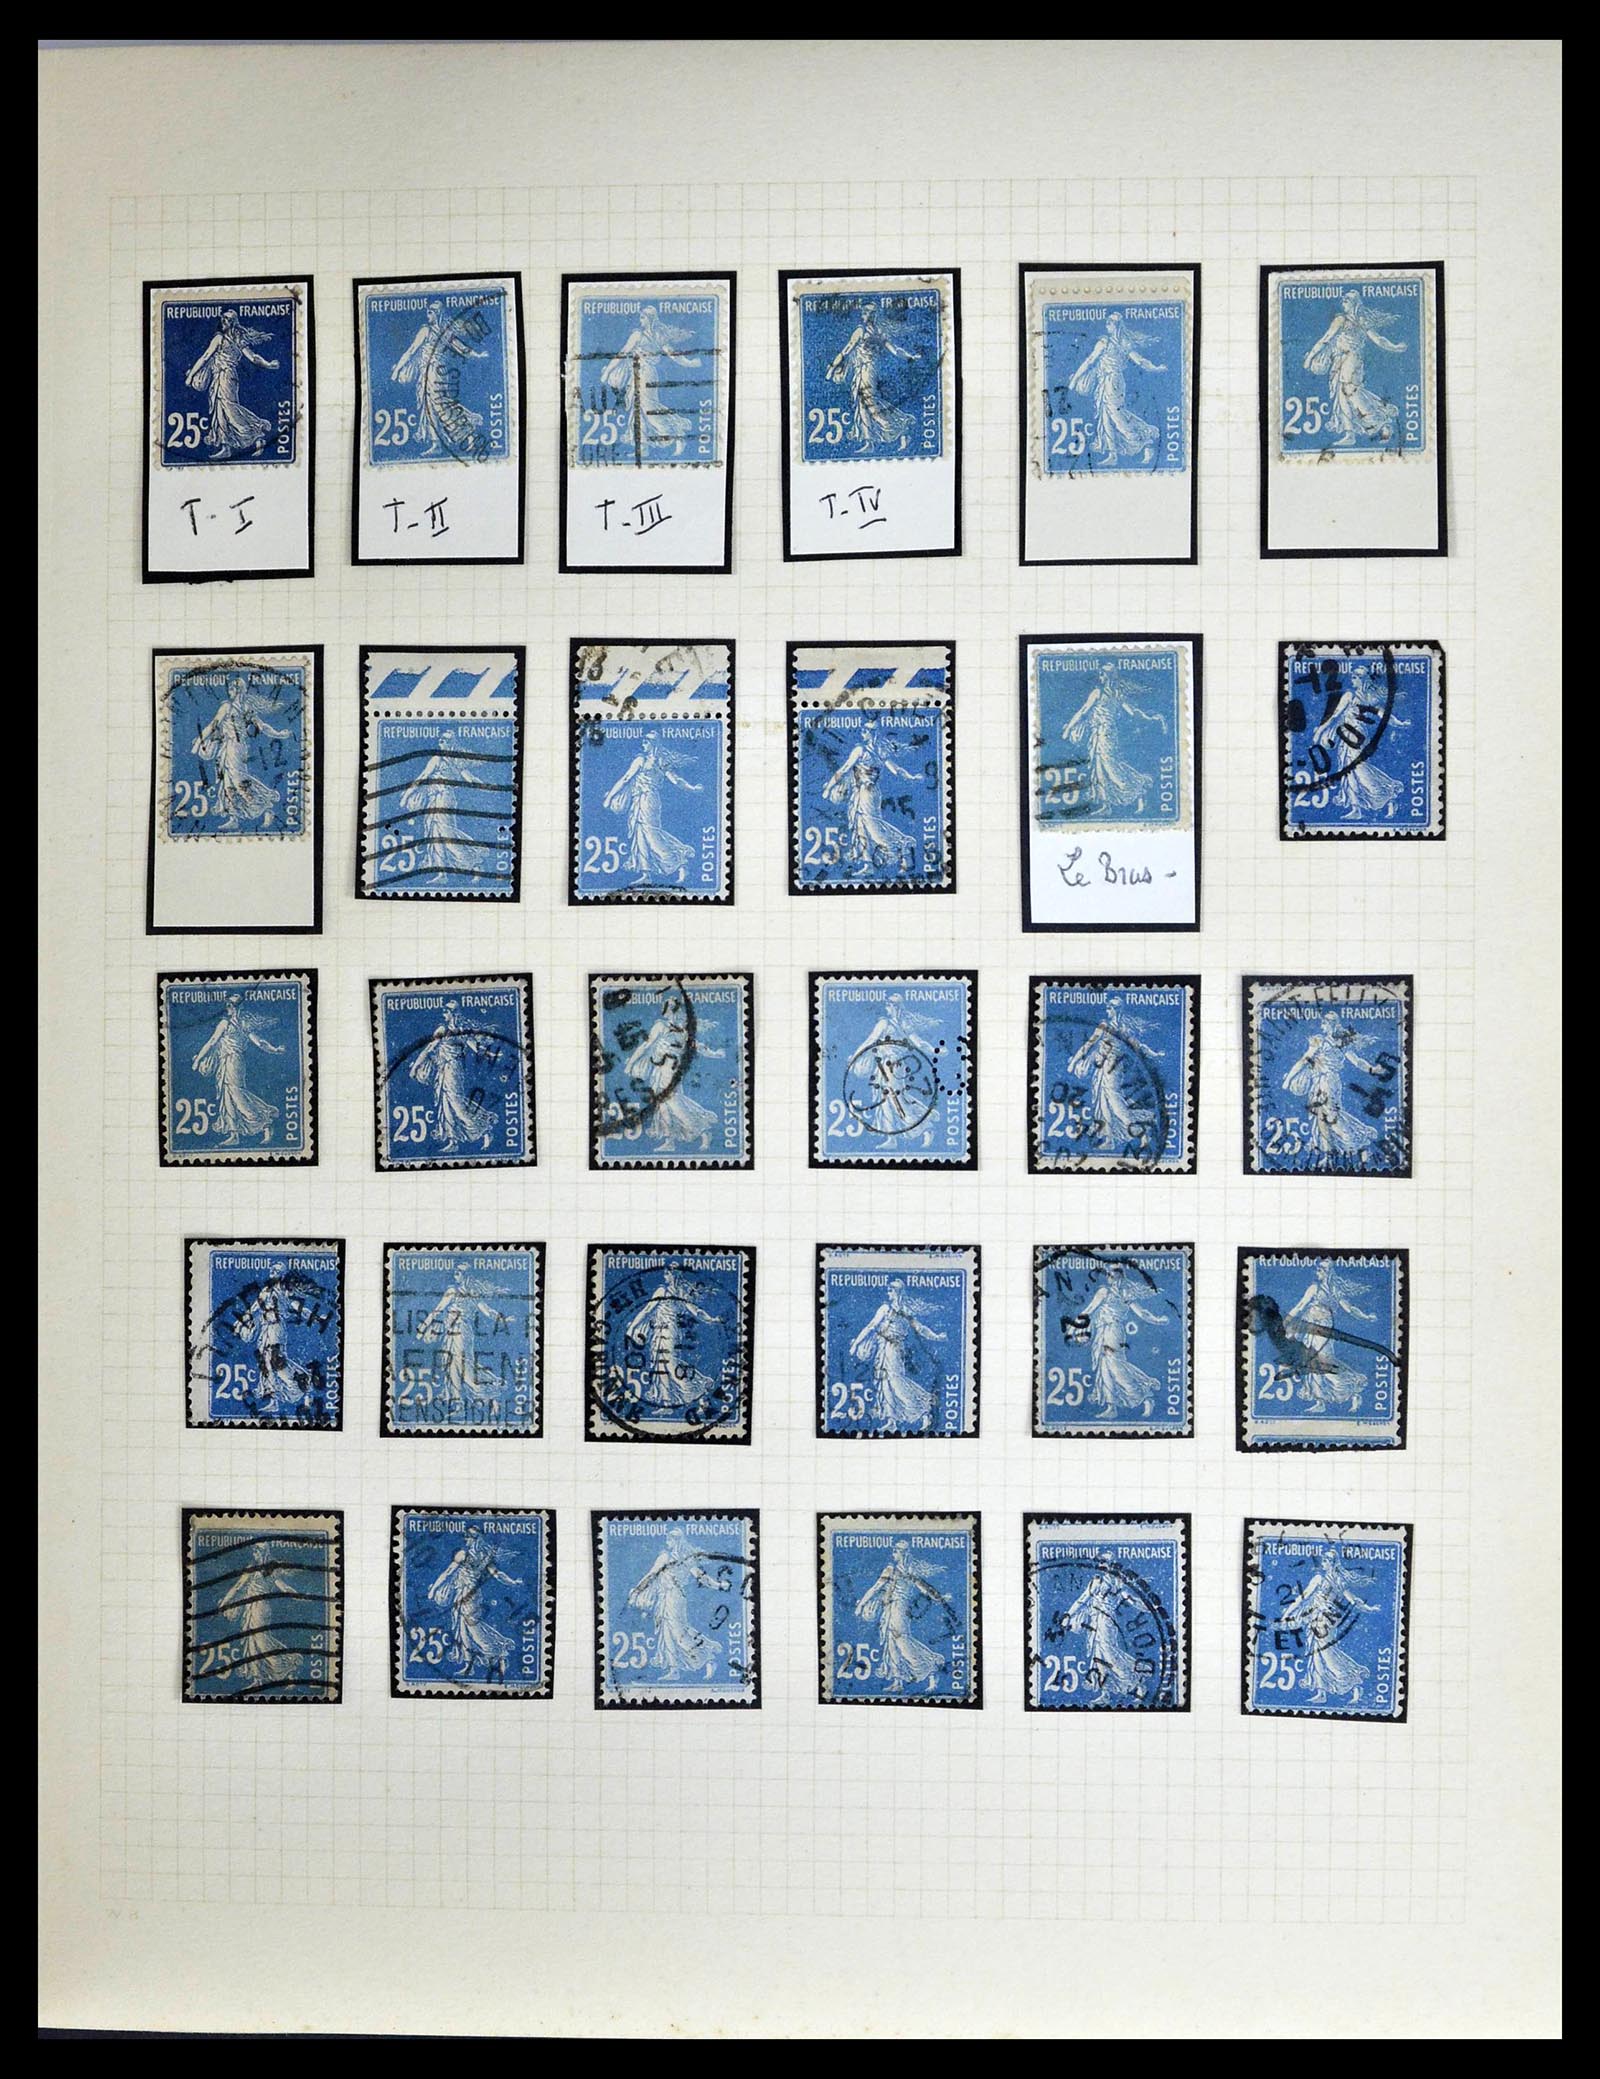 39329 0046 - Stamp collection 39329 France Semeuse.